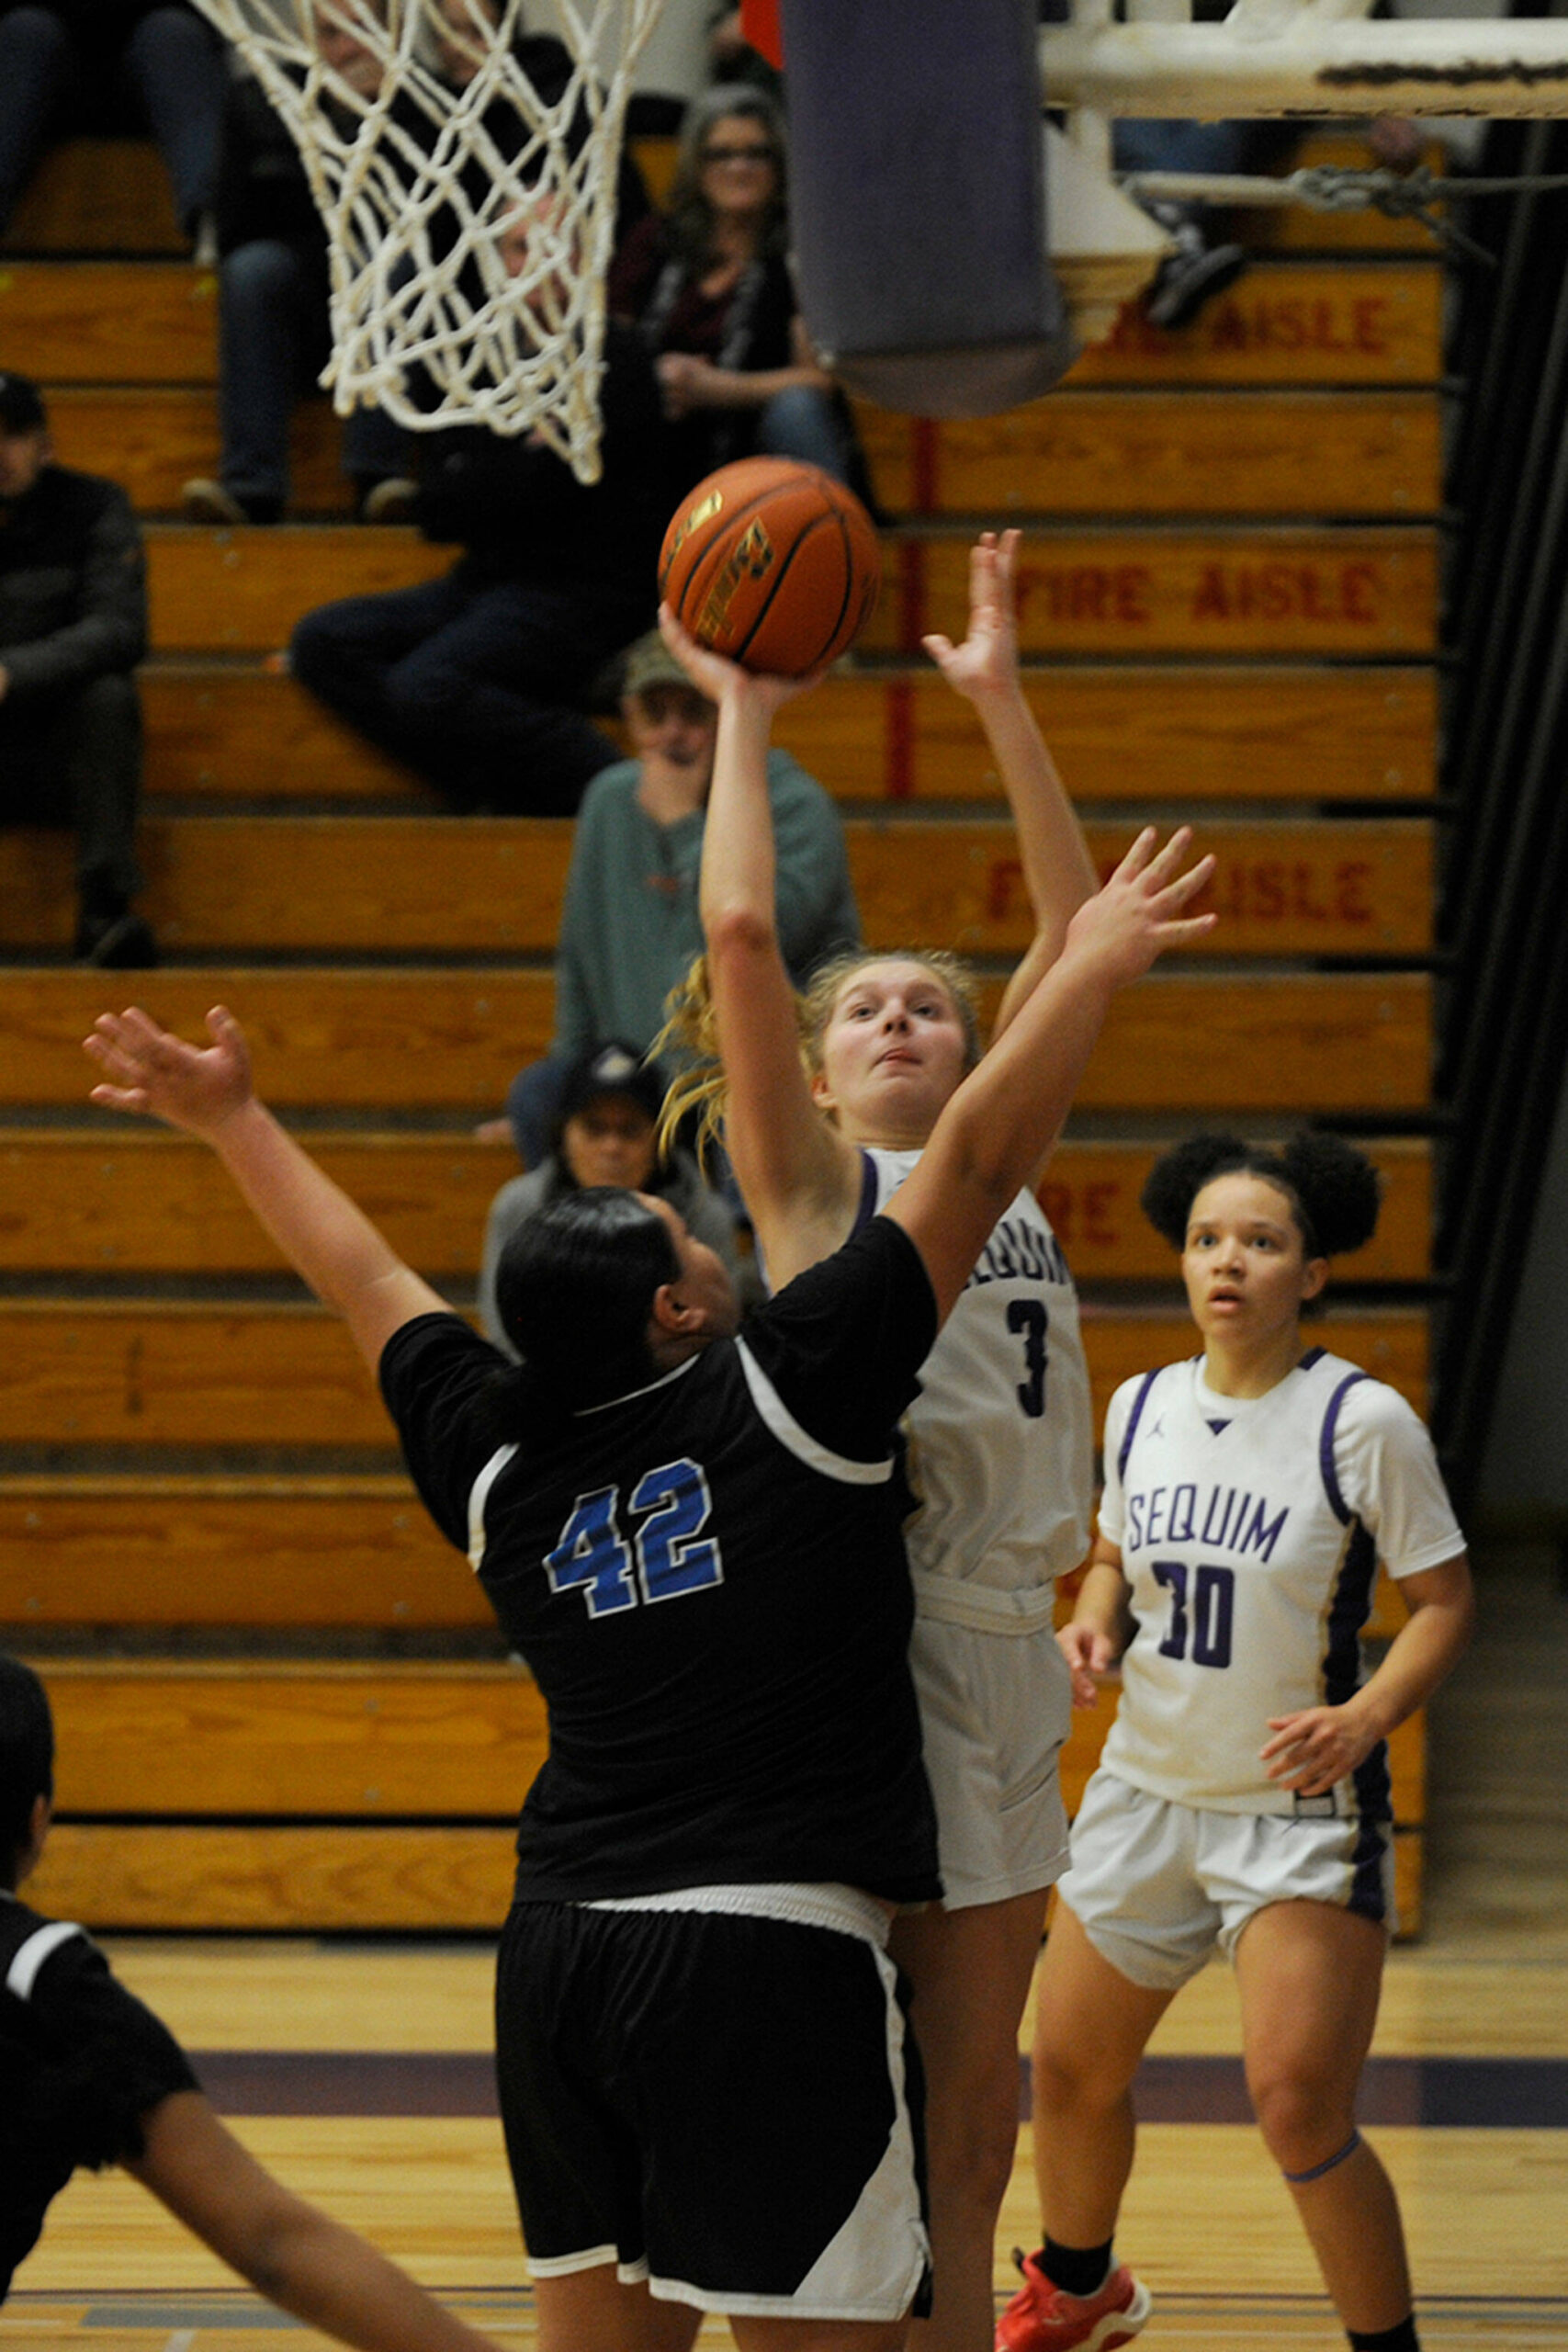 Sequim Gazette photo by Matthew Nash
With teammate Bobbi Mixon (right) looking on, Sequim’s Jolene Vaara goes up for a shot after grabbing an offensive rebound over North Mason’s Tanza Tupolo in an Olympic League match-up on Jan. 26.